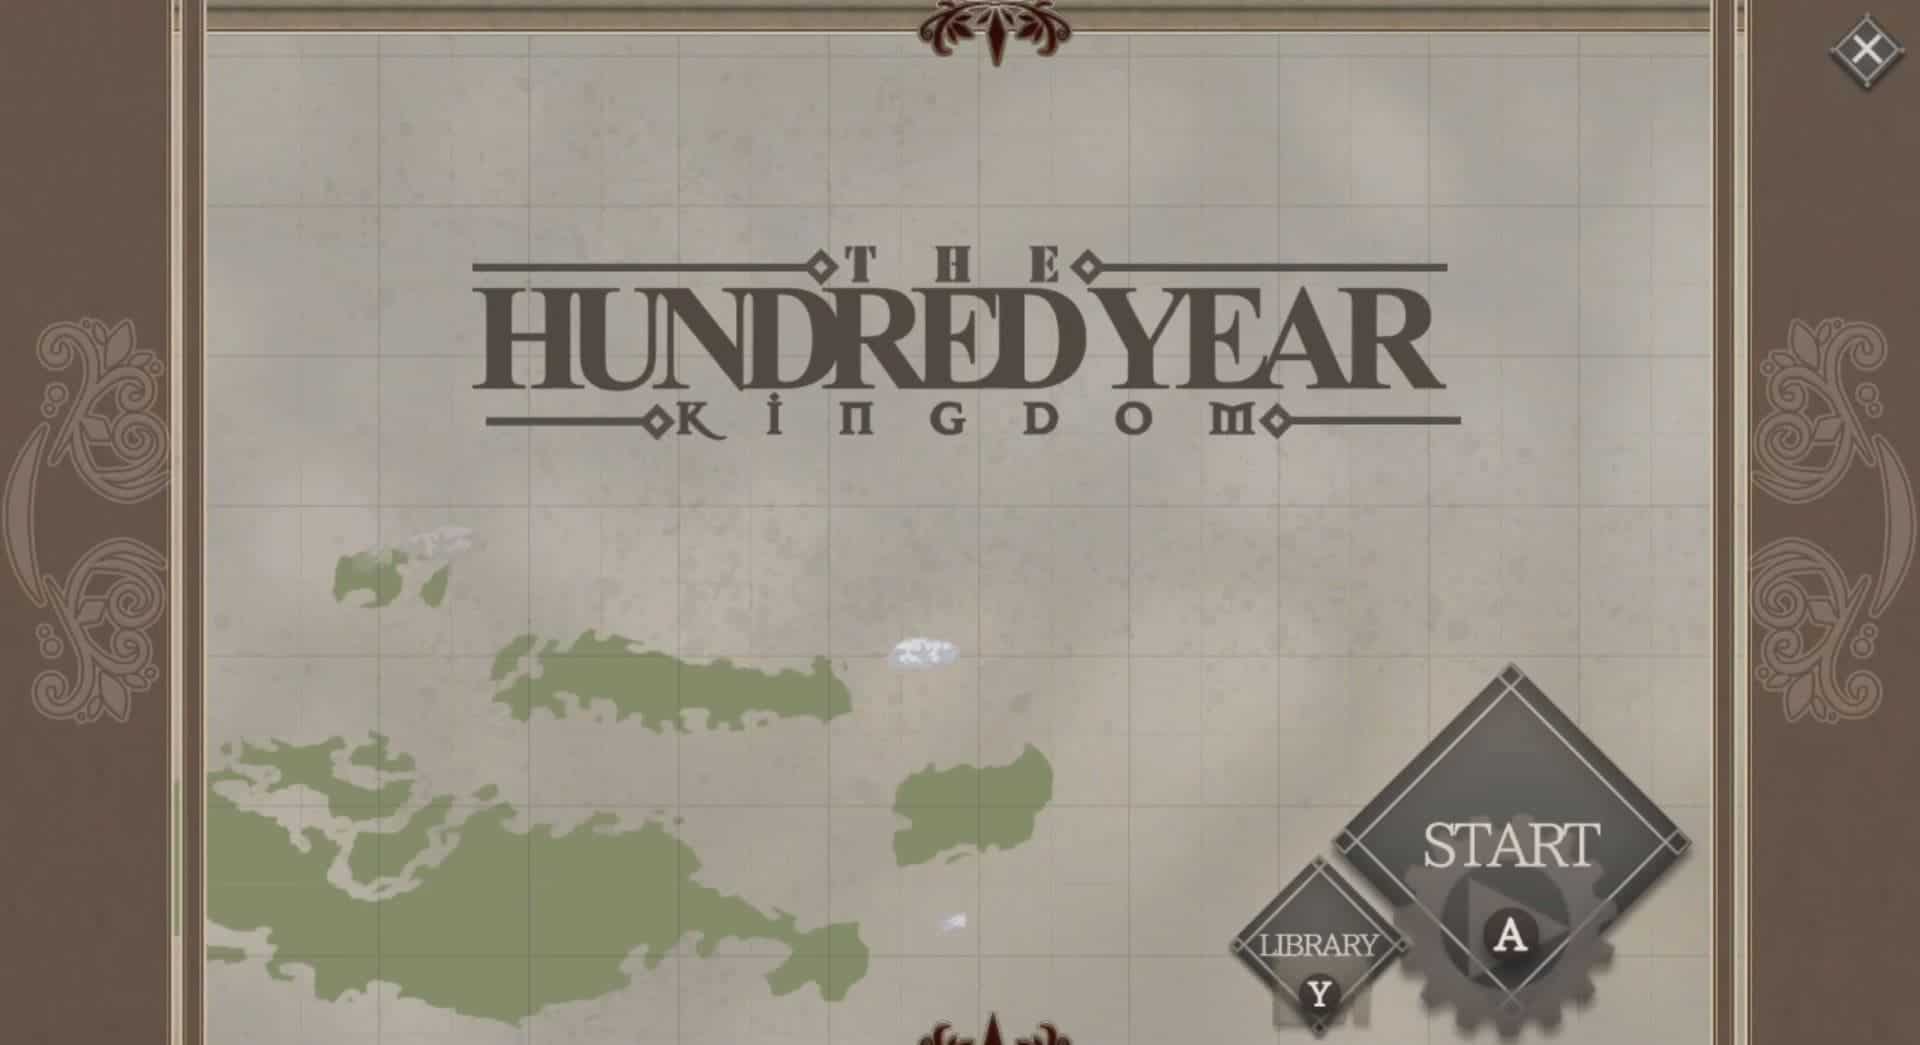 Turn-based Simulator, The Hundred Year Kingdom, has been announced for Switch